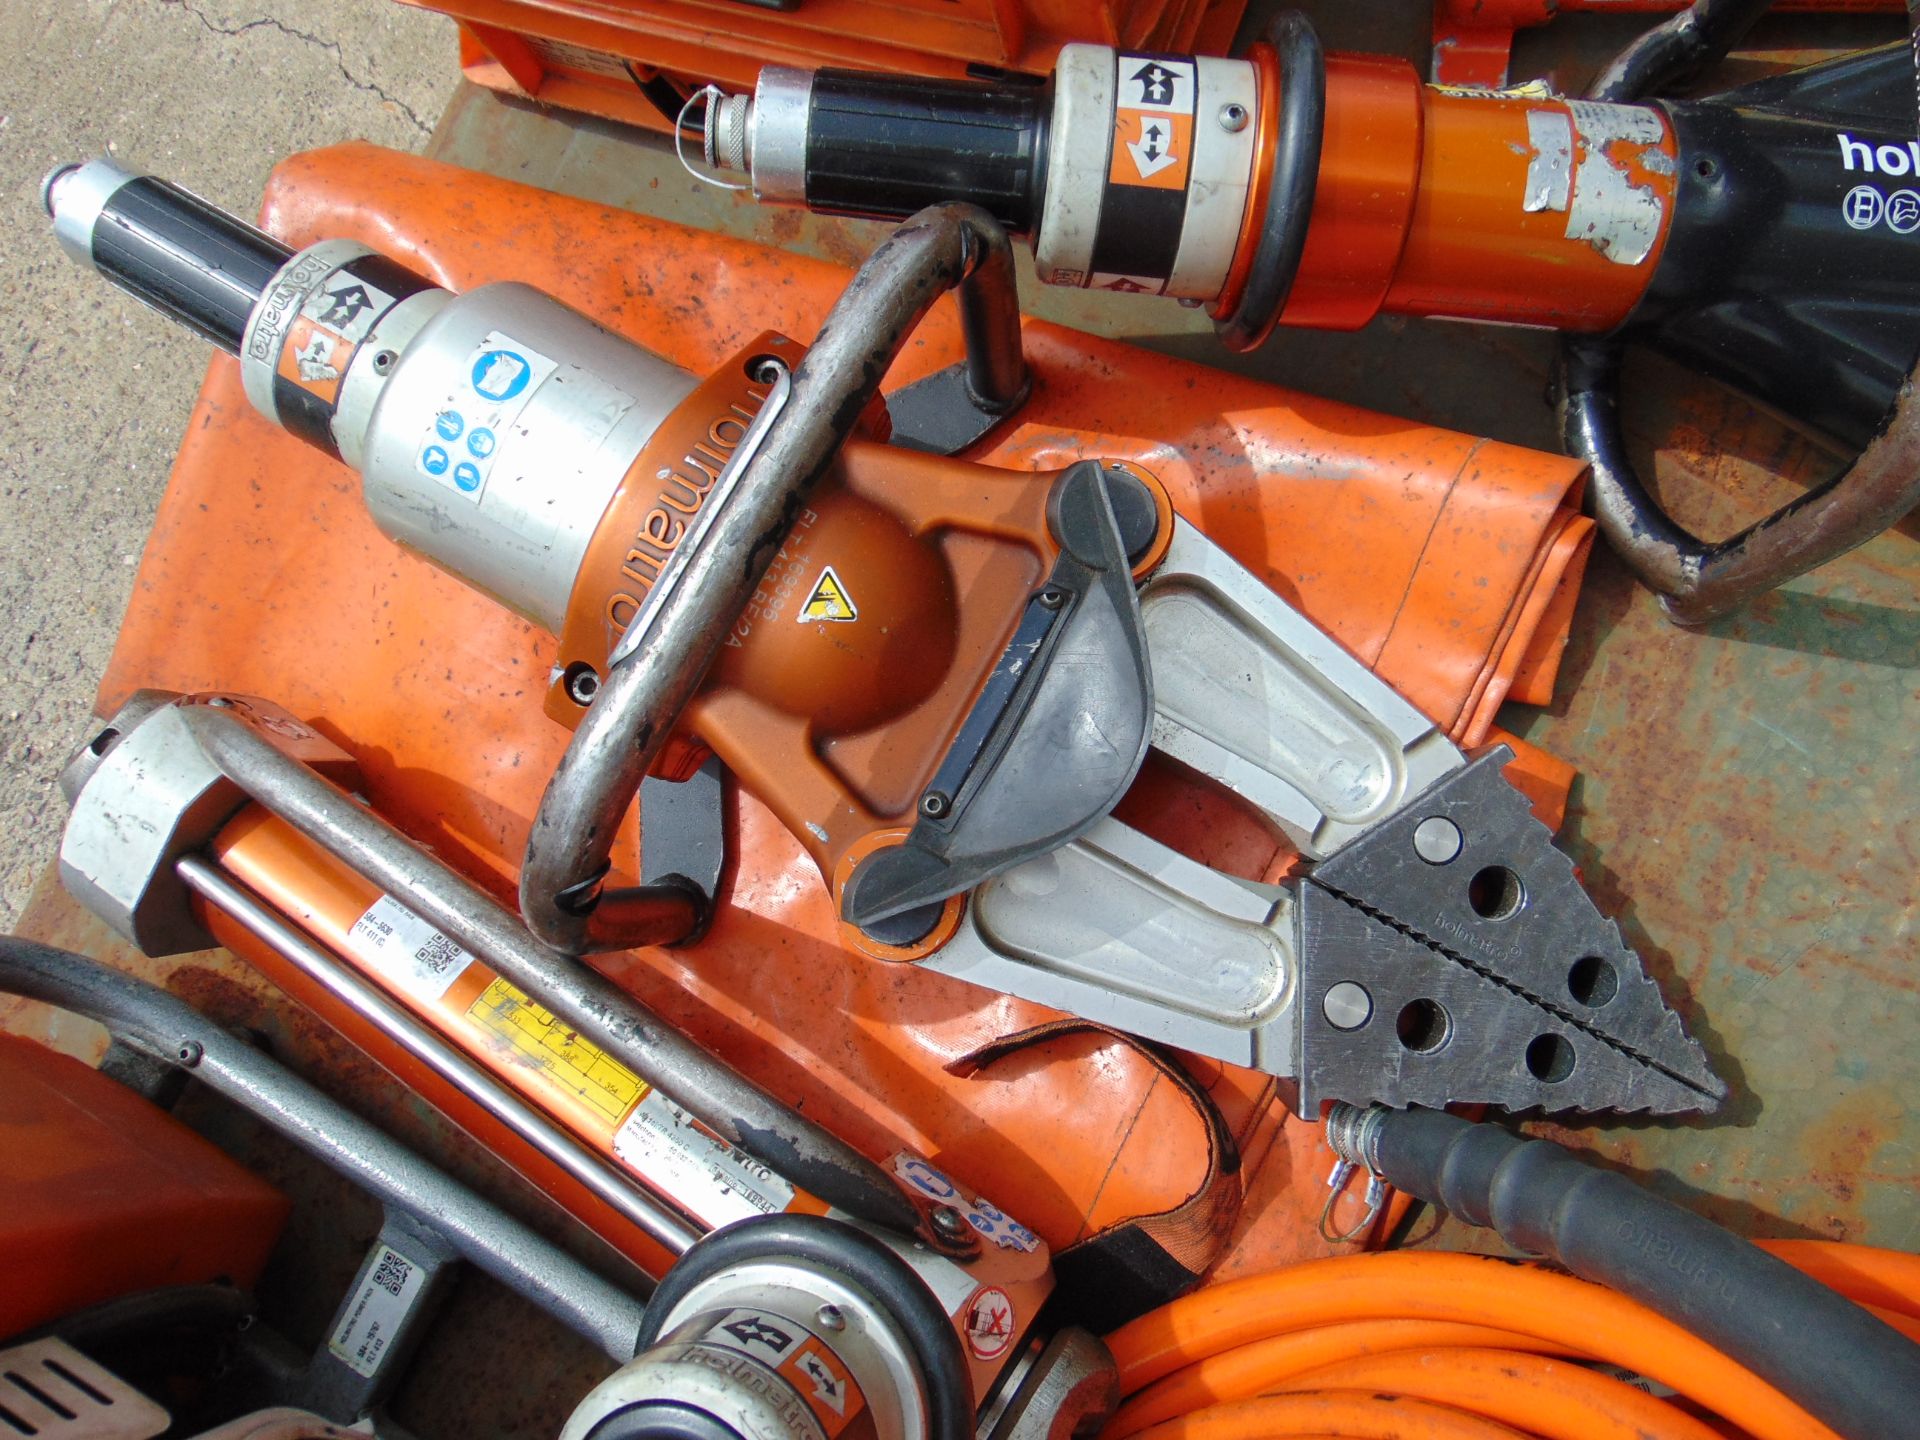 Holmatro Jaws of Life Rescue Kit inc Power Pack, Cutters, Spreaders, Ram etc - Image 6 of 18